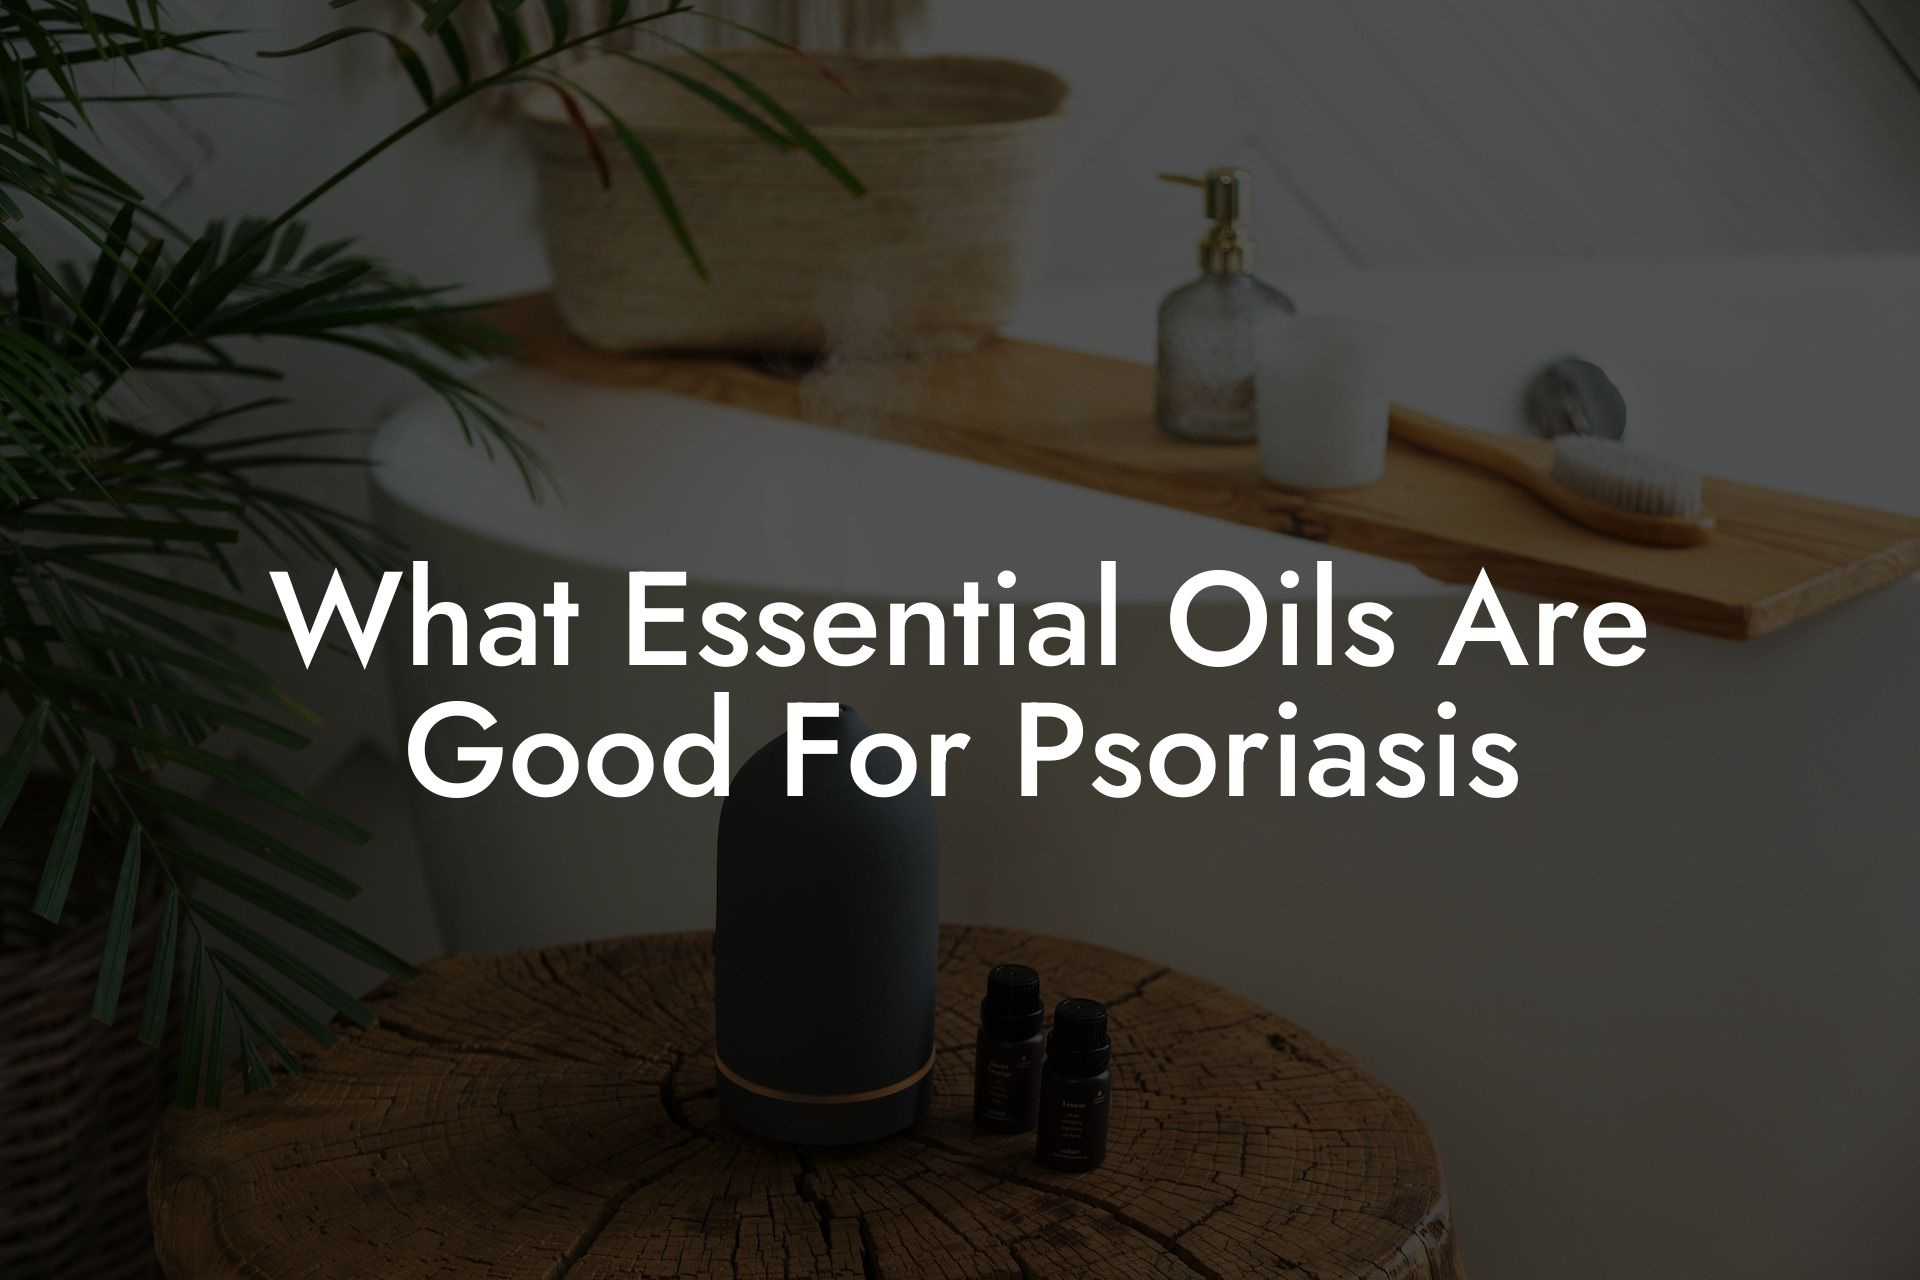 What Essential Oils Are Good For Psoriasis